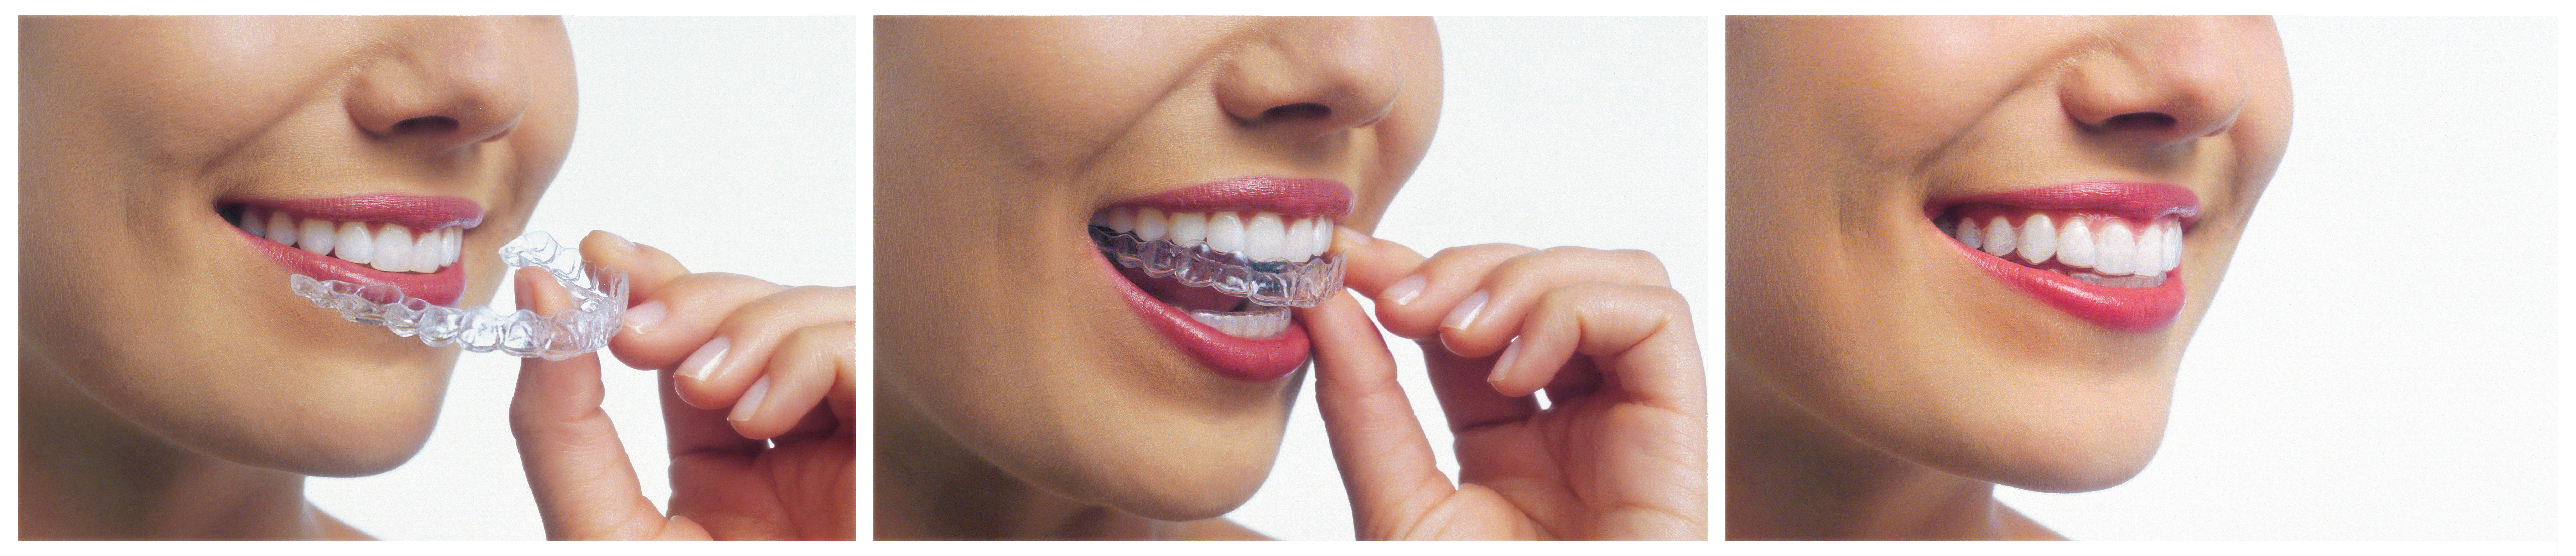 straighten teeth with invisalign for adults and teens